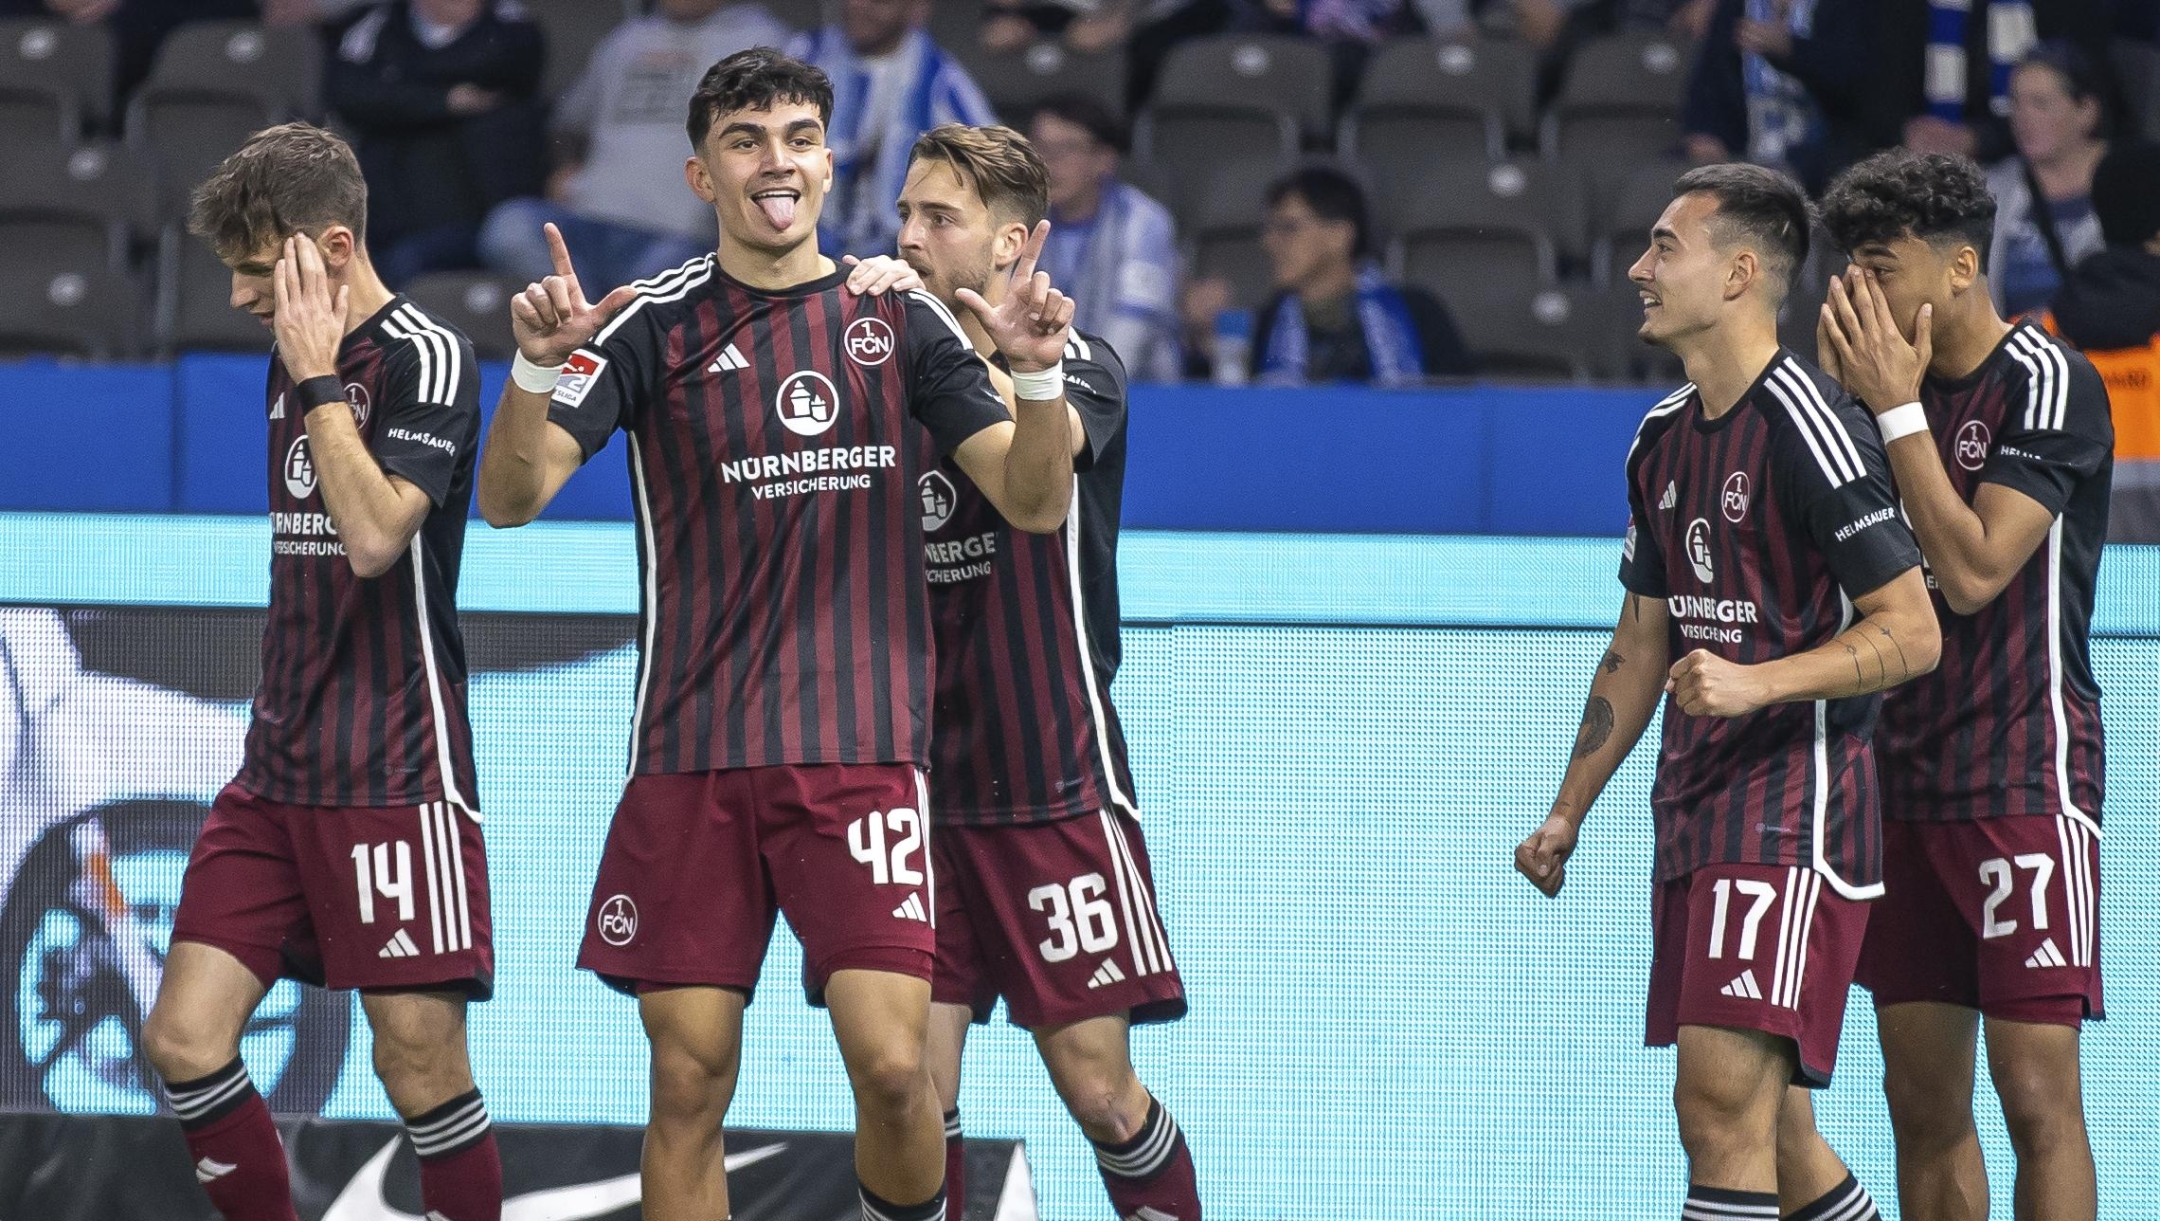 Nuremberg's Can Uzun, centre left, celebrates scoring a goal, during the Bundesliga second division soccer match between Hertha Berlin and Nuremberg, in Berlin, Saturday, March 30, 2024. One of Germany?s most exciting players isn?t even playing in the Bundesliga. Nuremberg teenager Can Uzun has 15 goals in the second division after scoring twice against Hertha Berlin this weekend. Only three players have more this season than the 18-year-old, whose performances have captured the attention of a host of clubs.  (Andreas Gora/dpa via AP)